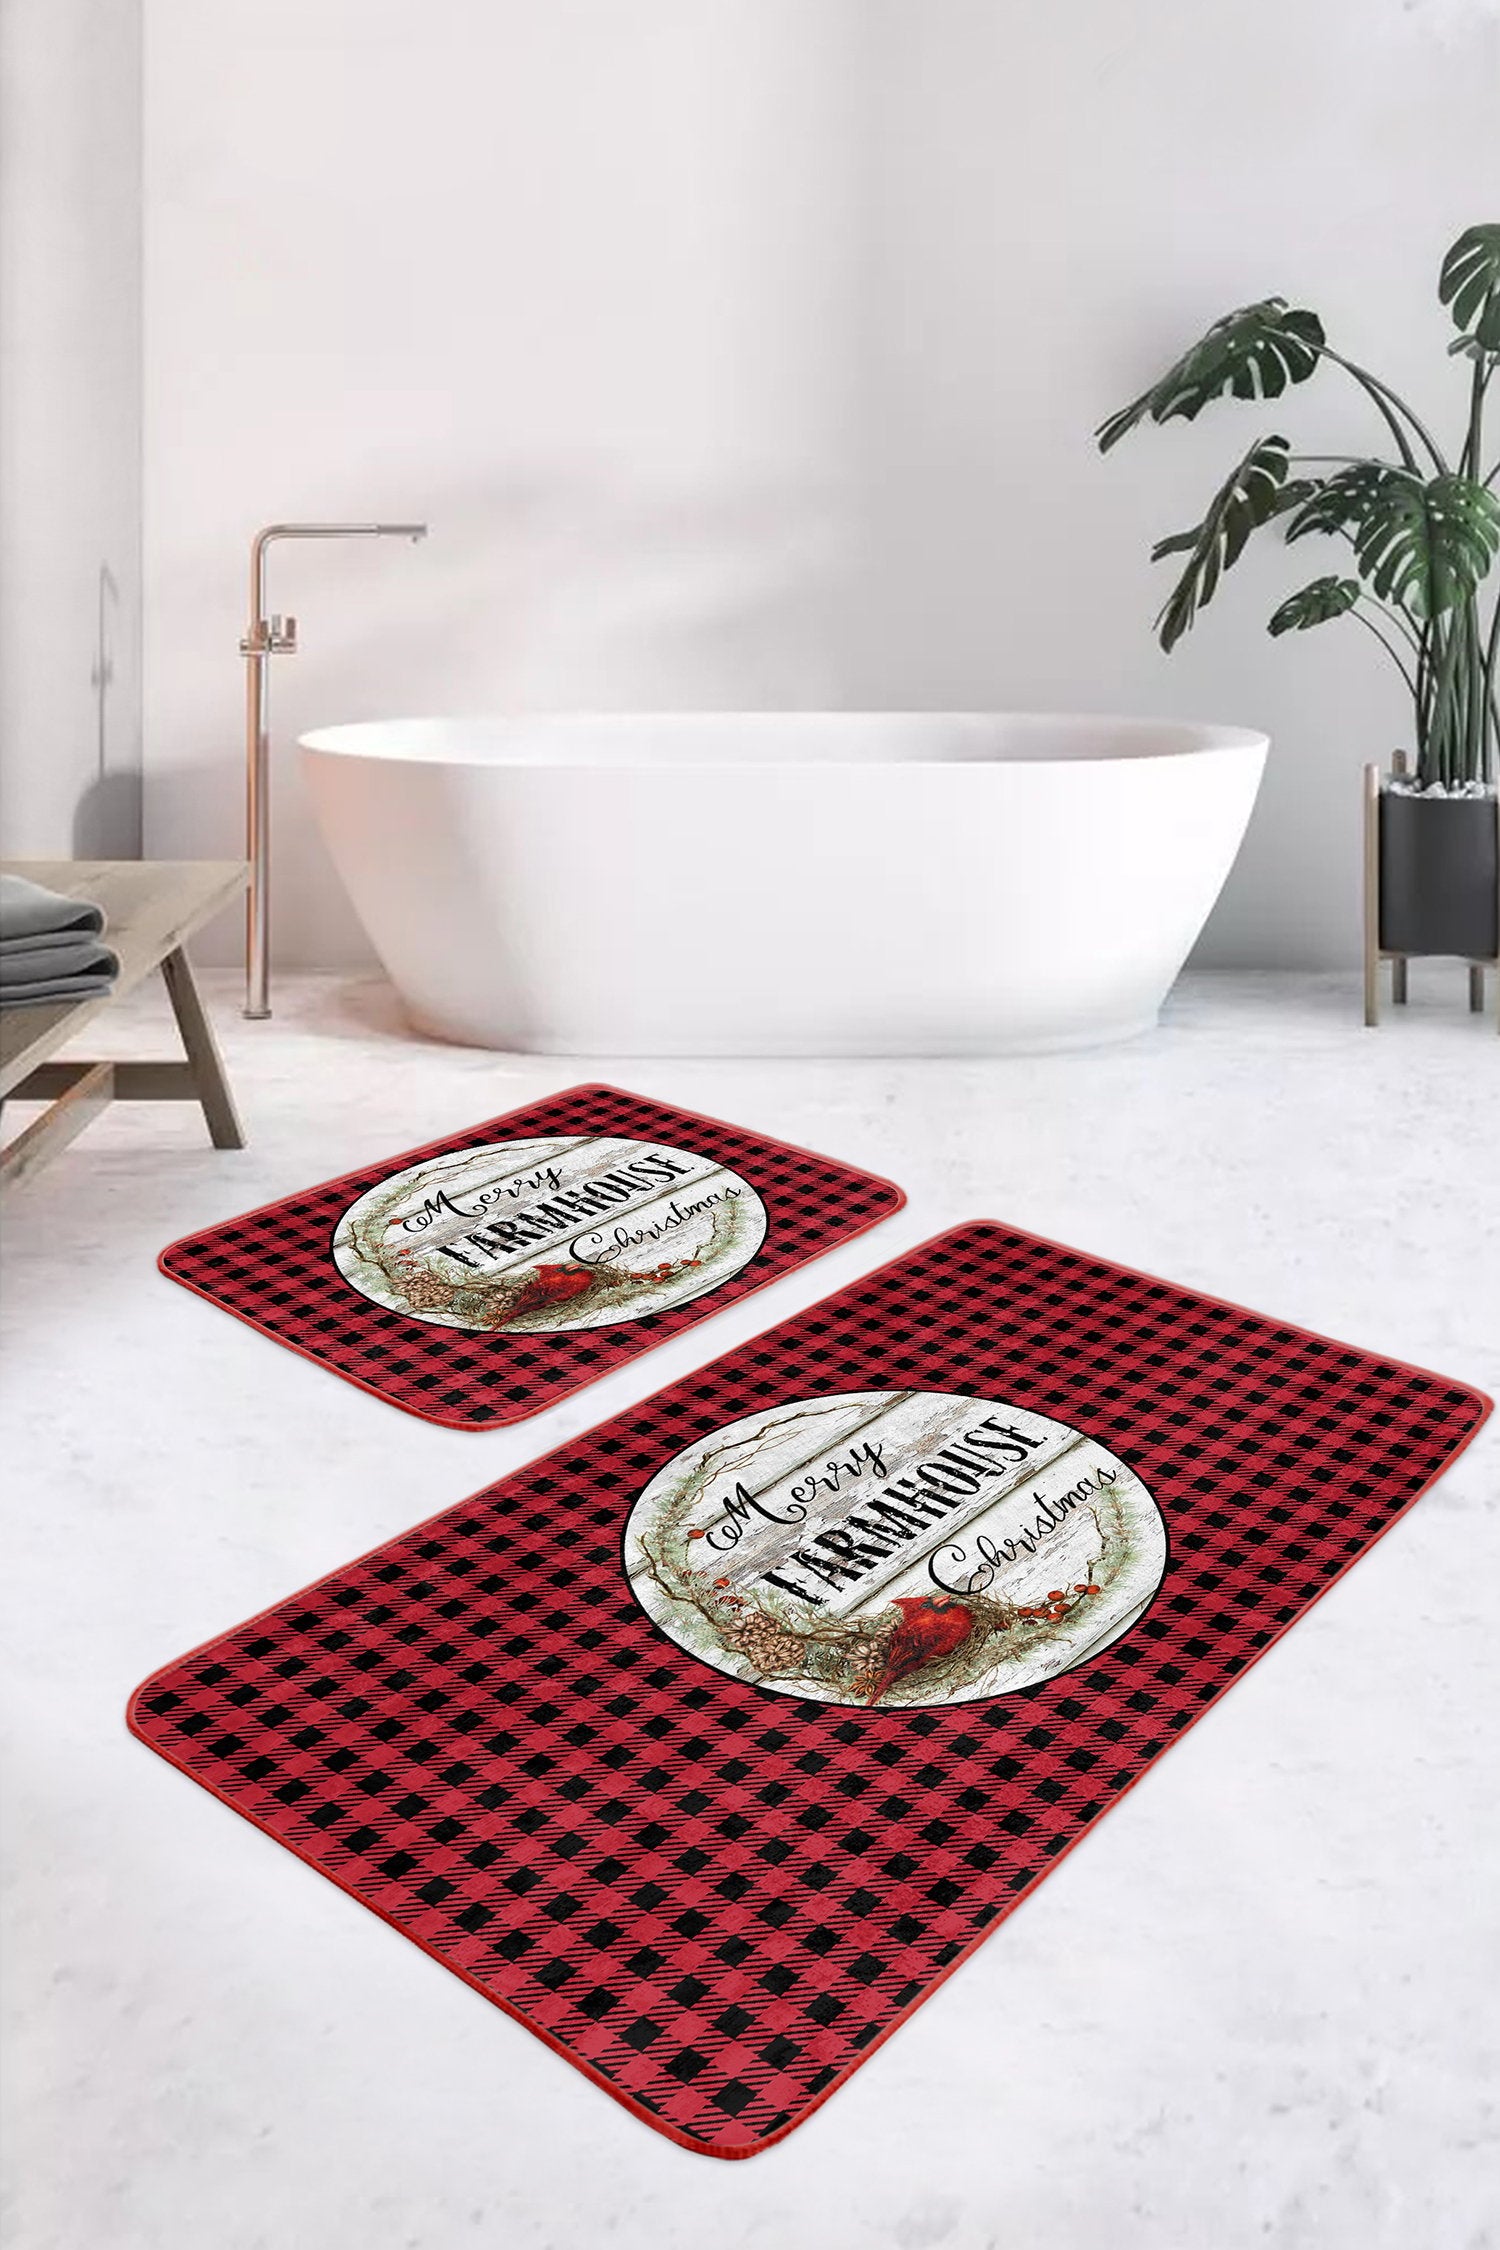 Decorative Bath Mat Set with a Charming Array of Merry Farmhouse Christmas Patterns